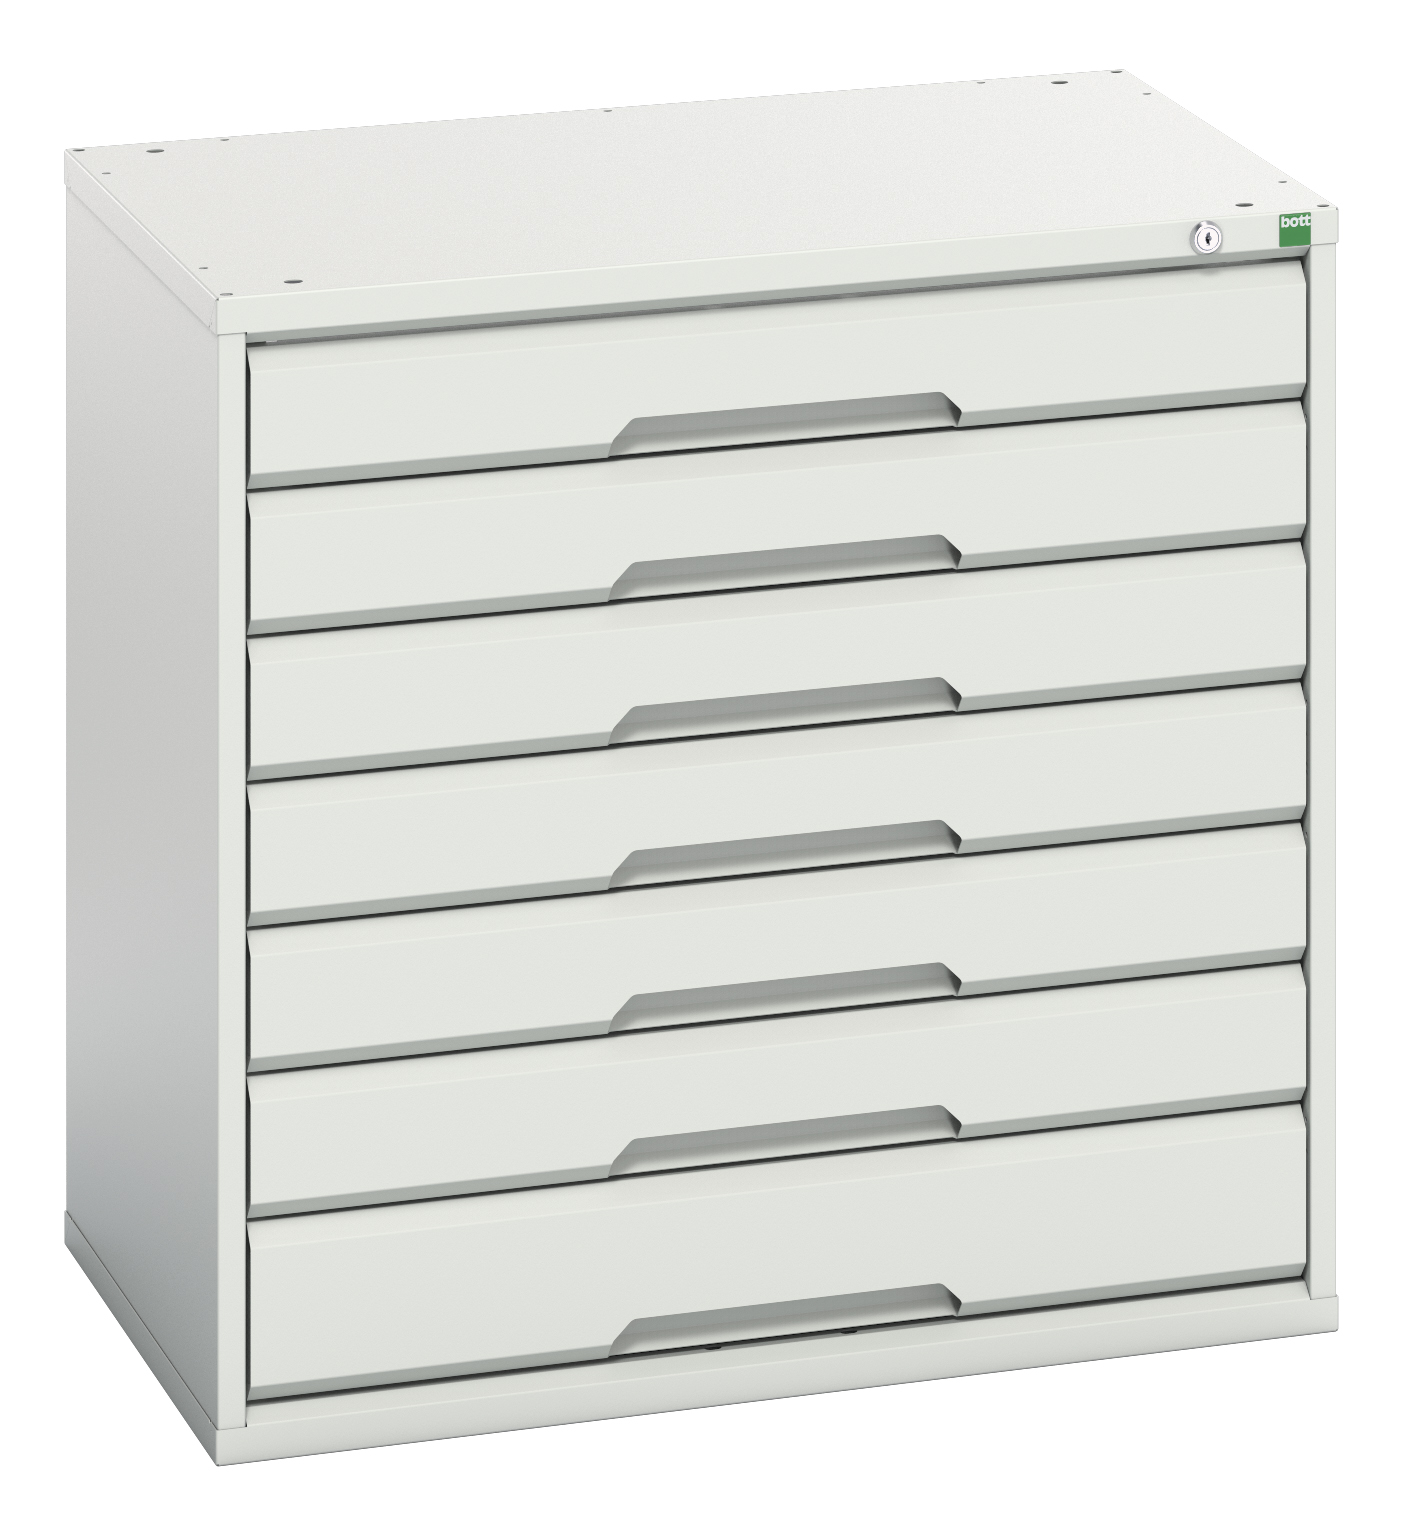 Bott Verso Drawer Cabinet With 7 Drawers - 16925115.16